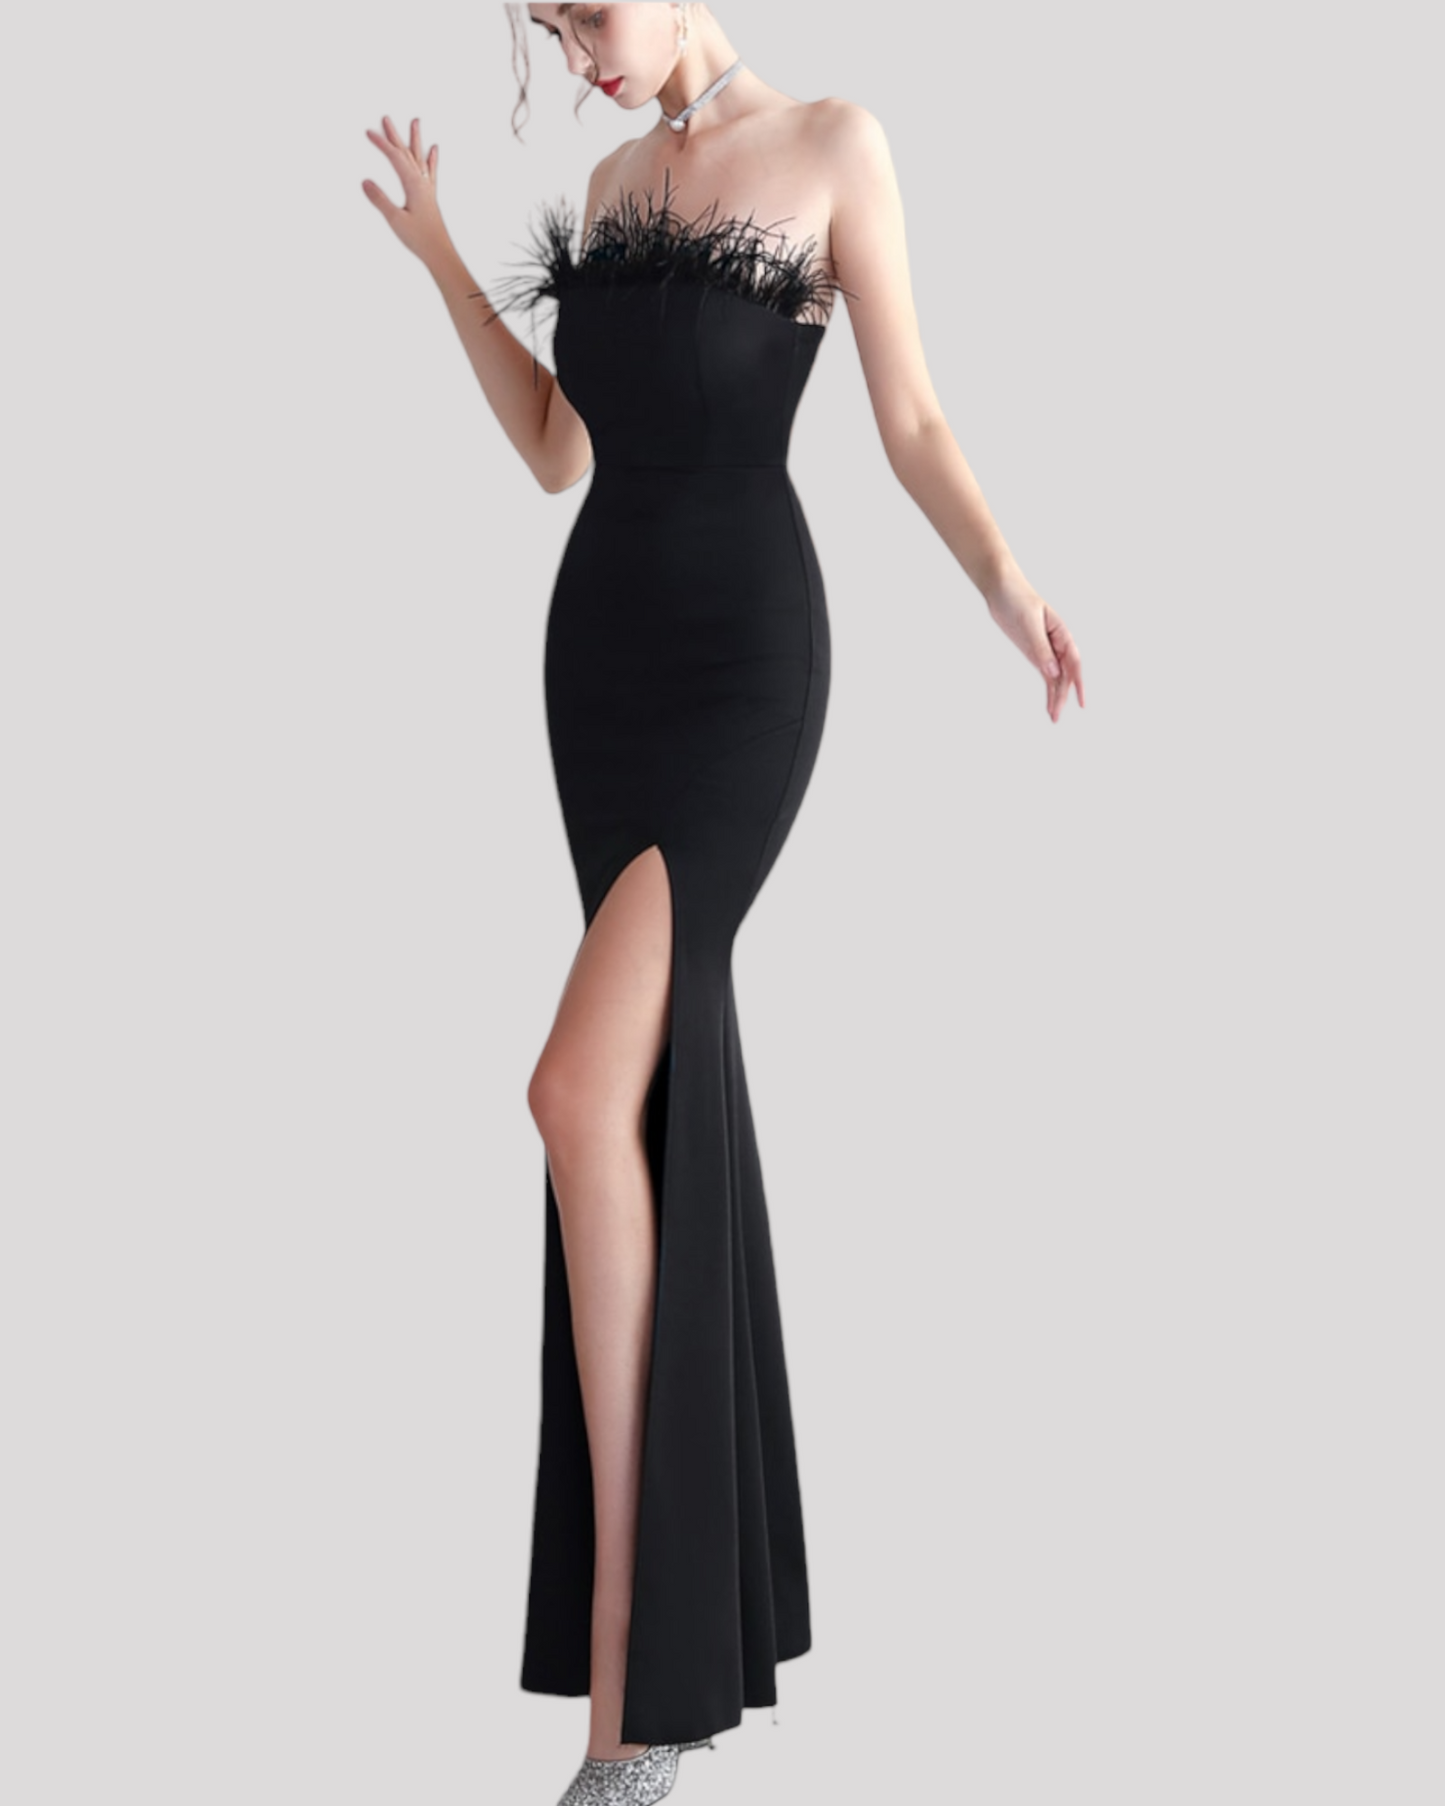 Feather Neckline Evening Dress with Front Leg Split, available in 6 Colours